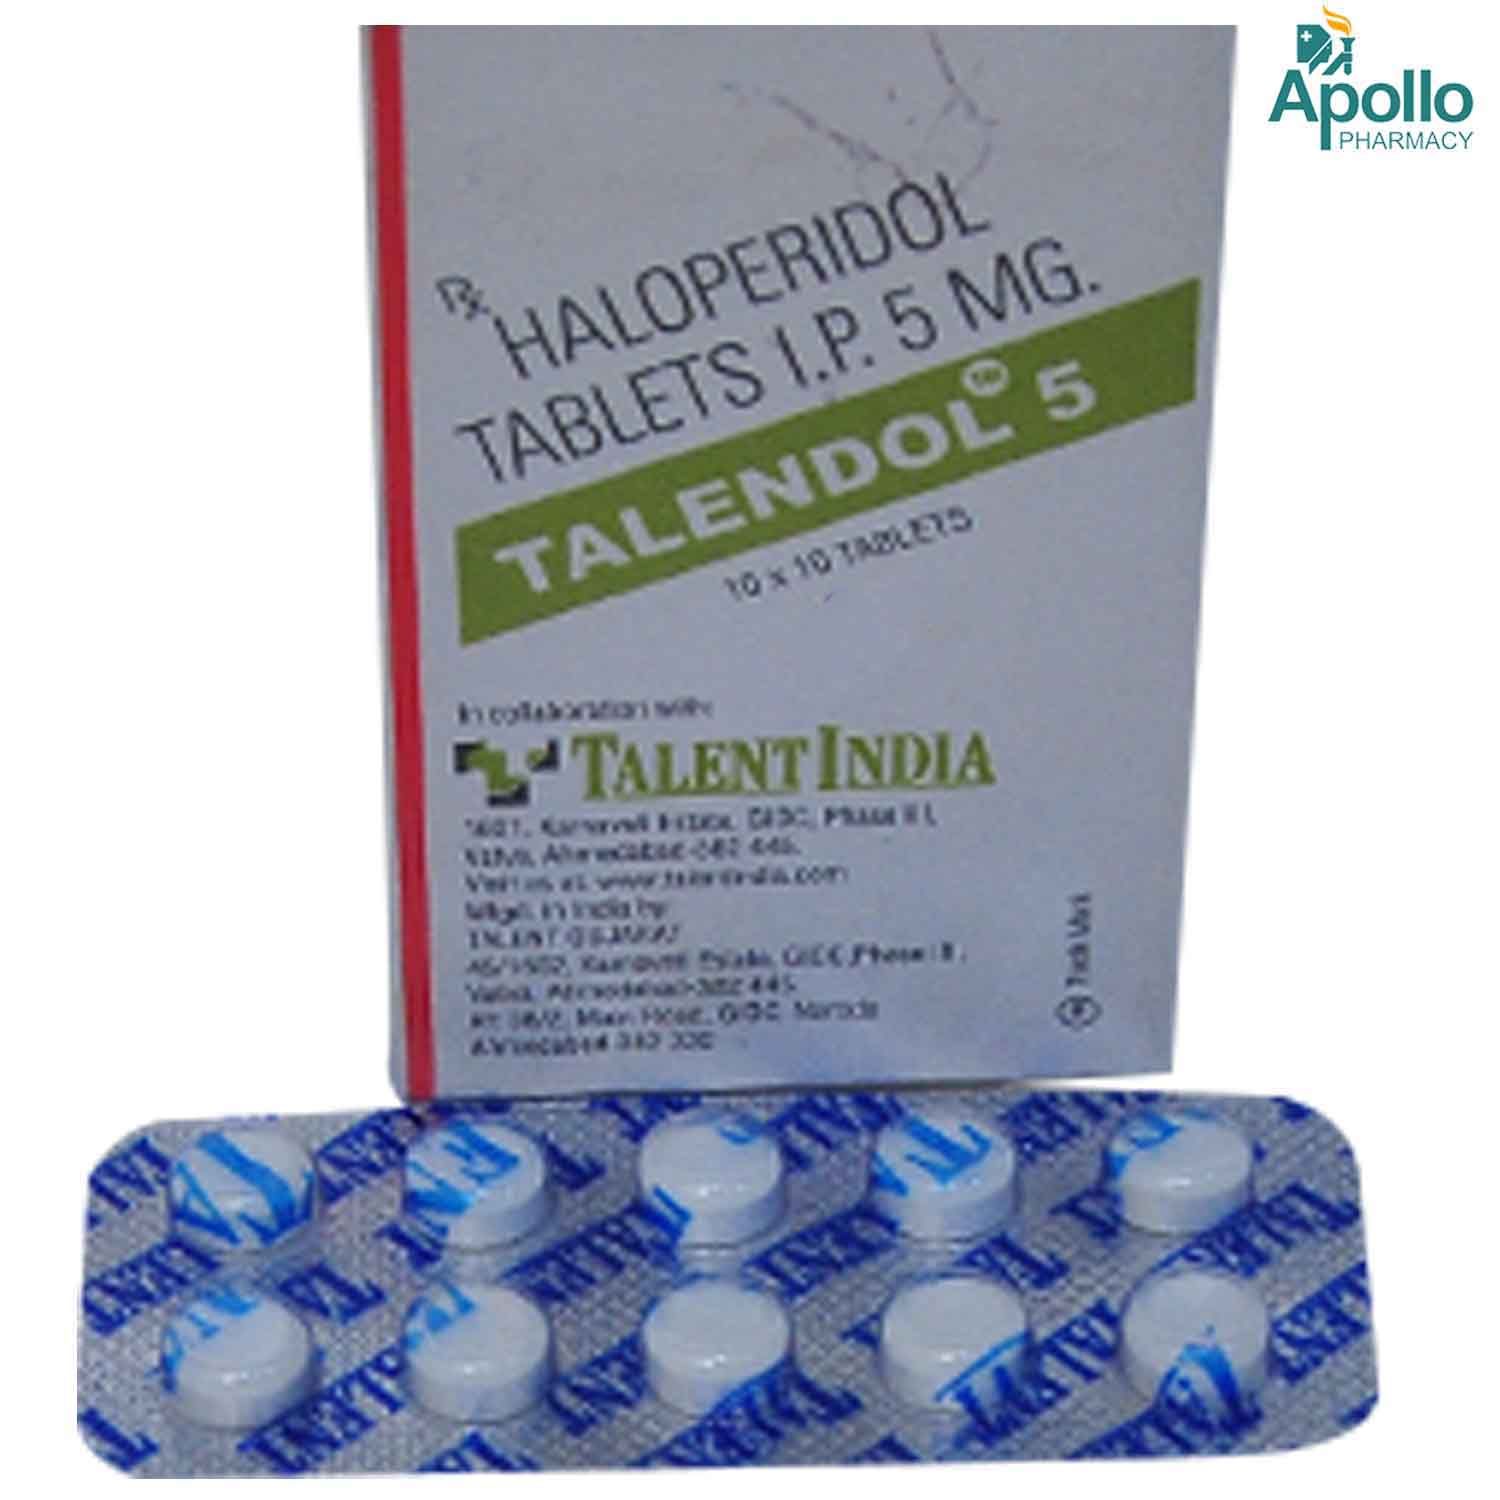 TALENDOL 5MG TABLET, Pack of 10 TABLETS